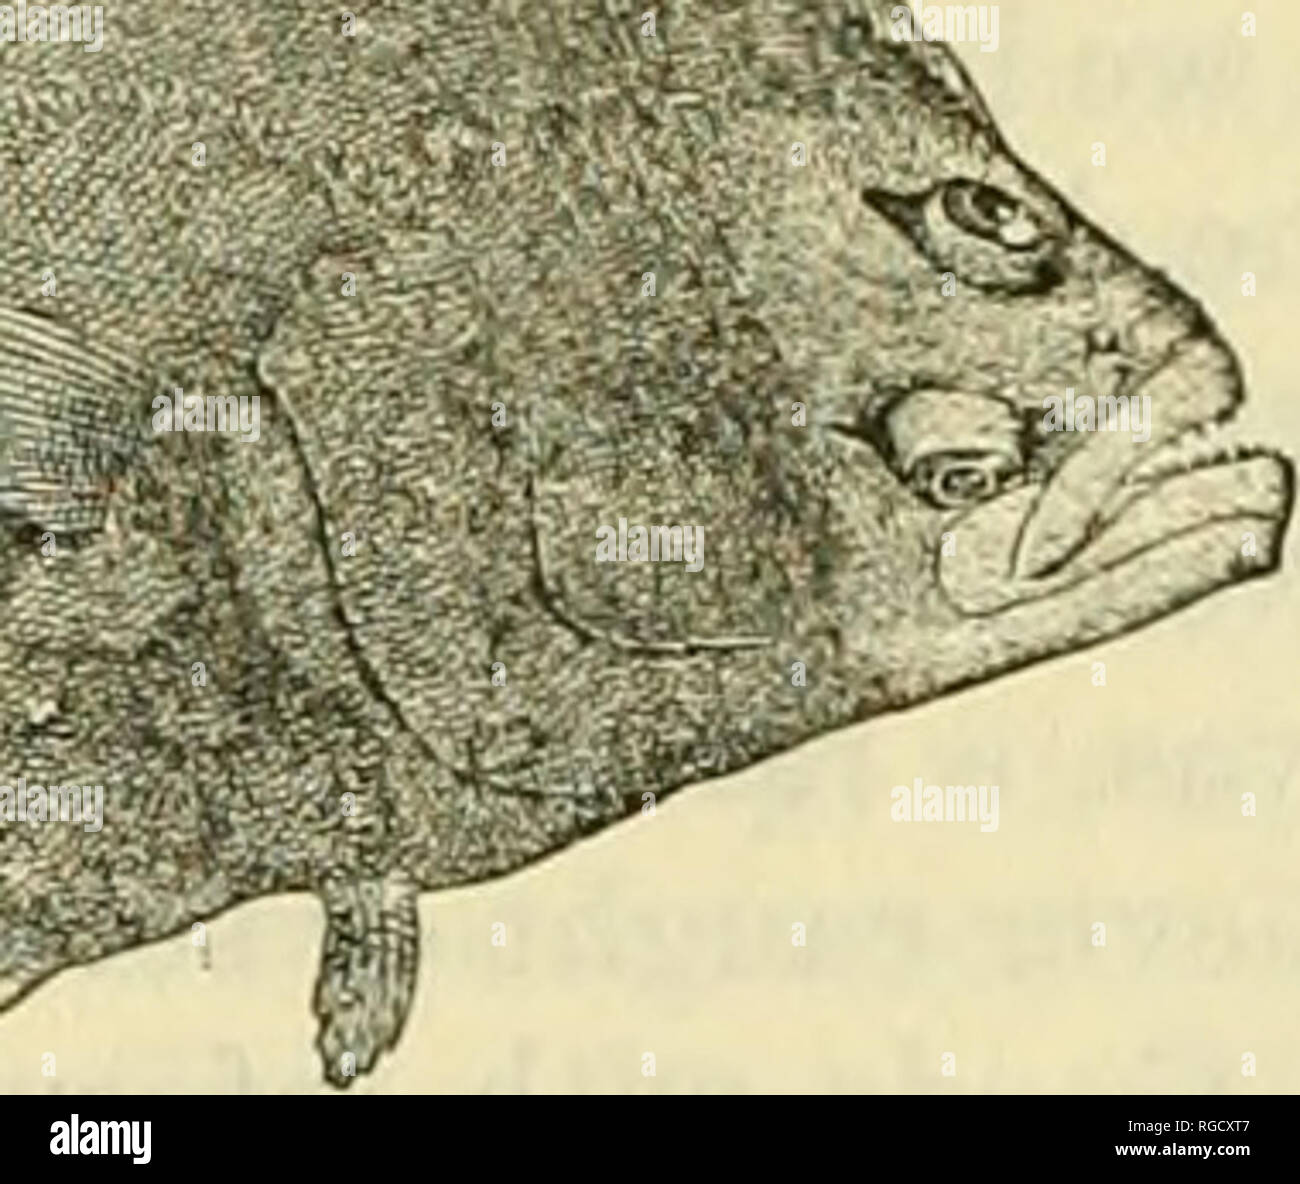 . Bulletin of the United States Fish Commission. Fisheries -- United States; Fish-culture -- United States. Fig. 238.—Halibut (.Hippoglossus hippoglossus) 165. Halibut (Hippoglossus hippoglossus Linnaeus) Jordan and Evermann, 1896-1900, p. 2611. Description.—This is not only the largest but one of the best characterized of flatfish, its most obvious diagnostic characters, apart from its size, being the facts that it lies on the left side;44 its mouth is large, gapes back to the eyes, and is armed with sharp curved teeth; its tail is emarginate, not rounded; its two ventral fins are alike; and  Stock Photo